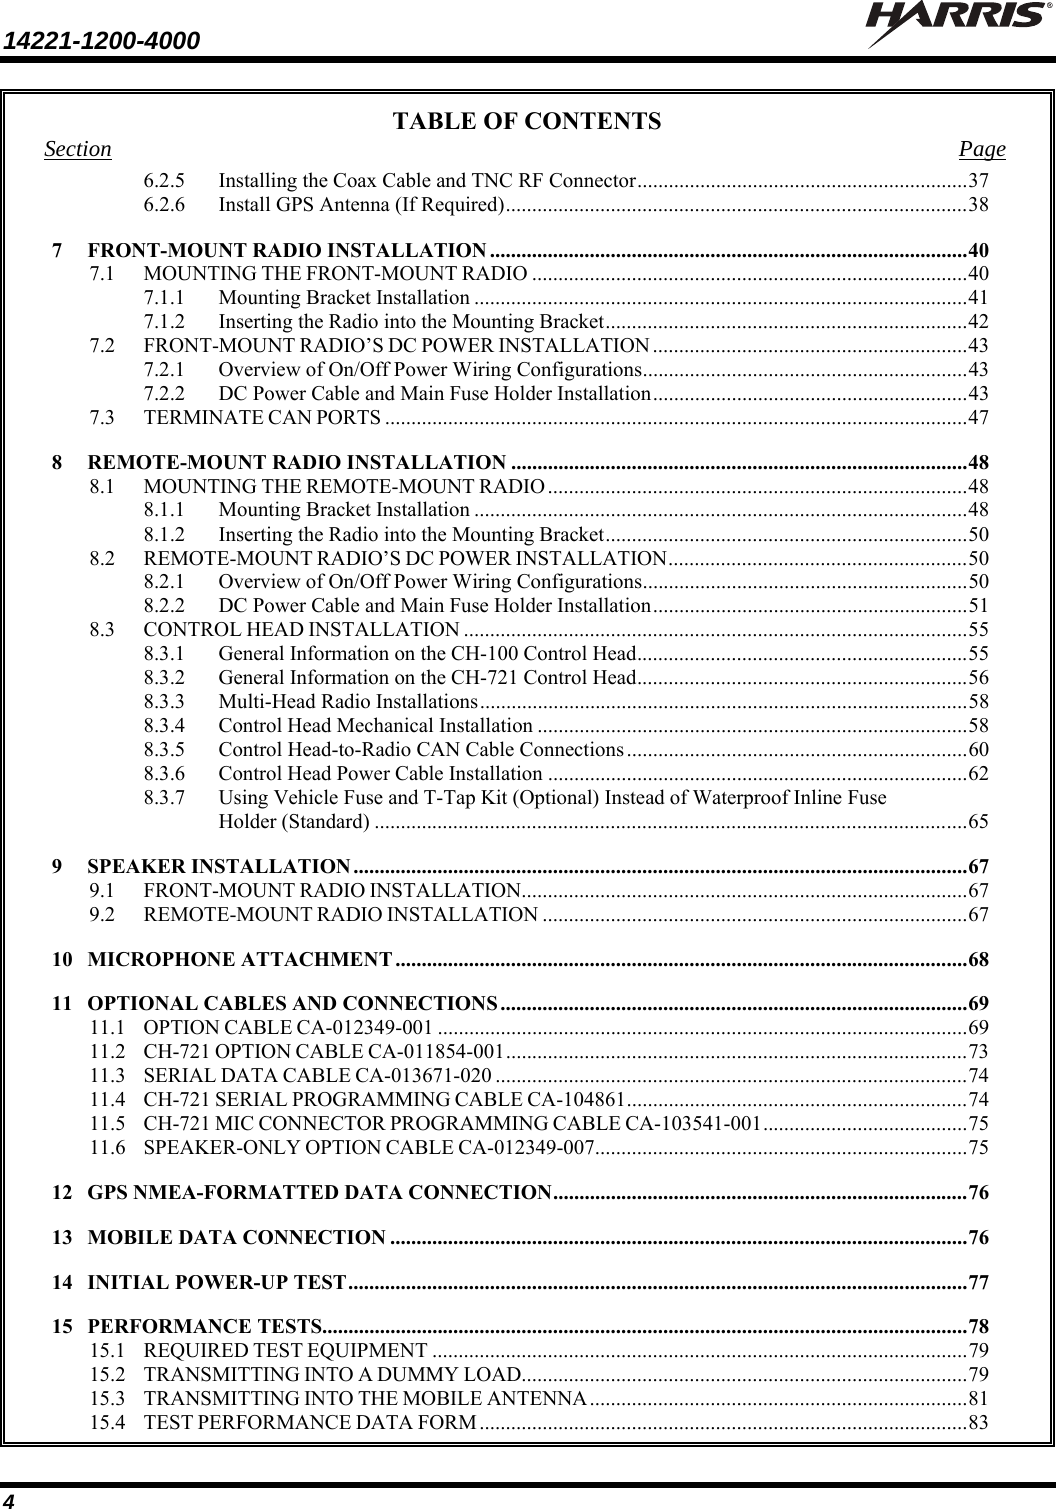 14221-1200-4000    4 TABLE OF CONTENTS Section Page 6.2.5Installing the Coax Cable and TNC RF Connector ............................................................... 376.2.6Install GPS Antenna (If Required) ........................................................................................ 387FRONT-MOUNT RADIO INSTALLATION ........................................................................................... 407.1MOUNTING THE FRONT-MOUNT RADIO ................................................................................... 407.1.1Mounting Bracket Installation .............................................................................................. 417.1.2Inserting the Radio into the Mounting Bracket ..................................................................... 427.2FRONT-MOUNT RADIO’S DC POWER INSTALLATION ............................................................ 437.2.1Overview of On/Off Power Wiring Configurations .............................................................. 437.2.2DC Power Cable and Main Fuse Holder Installation ............................................................ 437.3TERMINATE CAN PORTS ............................................................................................................... 478REMOTE-MOUNT RADIO INSTALLATION ....................................................................................... 488.1MOUNTING THE REMOTE-MOUNT RADIO ................................................................................ 488.1.1Mounting Bracket Installation .............................................................................................. 488.1.2Inserting the Radio into the Mounting Bracket ..................................................................... 508.2REMOTE-MOUNT RADIO’S DC POWER INSTALLATION ......................................................... 508.2.1Overview of On/Off Power Wiring Configurations .............................................................. 508.2.2DC Power Cable and Main Fuse Holder Installation ............................................................ 518.3CONTROL HEAD INSTALLATION ................................................................................................ 558.3.1General Information on the CH-100 Control Head ............................................................... 558.3.2General Information on the CH-721 Control Head ............................................................... 568.3.3Multi-Head Radio Installations ............................................................................................. 588.3.4Control Head Mechanical Installation .................................................................................. 588.3.5Control Head-to-Radio CAN Cable Connections ................................................................. 608.3.6Control Head Power Cable Installation ................................................................................ 628.3.7Using Vehicle Fuse and T-Tap Kit (Optional) Instead of Waterproof Inline Fuse Holder (Standard) ................................................................................................................. 659SPEAKER INSTALLATION ..................................................................................................................... 679.1FRONT-MOUNT RADIO INSTALLATION .....................................................................................  679.2REMOTE-MOUNT RADIO INSTALLATION ................................................................................. 6710MICROPHONE ATTACHMENT ............................................................................................................. 6811OPTIONAL CABLES AND CONNECTIONS ......................................................................................... 6911.1OPTION CABLE CA-012349-001 ..................................................................................................... 6911.2CH-721 OPTION CABLE CA-011854-001 ........................................................................................ 7311.3SERIAL DATA CABLE CA-013671-020 .......................................................................................... 7411.4CH-721 SERIAL PROGRAMMING CABLE CA-104861 ................................................................. 7411.5CH-721 MIC CONNECTOR PROGRAMMING CABLE CA-103541-001 ....................................... 7511.6SPEAKER-ONLY OPTION CABLE CA-012349-007....................................................................... 7512GPS NMEA-FORMATTED DATA CONNECTION ............................................................................... 7613MOBILE DATA CONNECTION .............................................................................................................. 7614INITIAL POWER-UP TEST ...................................................................................................................... 7715PERFORMANCE TESTS........................................................................................................................... 7815.1REQUIRED TEST EQUIPMENT ...................................................................................................... 7915.2TRANSMITTING INTO A DUMMY LOAD..................................................................................... 7915.3TRANSMITTING INTO THE MOBILE ANTENNA ........................................................................ 8115.4TEST PERFORMANCE DATA FORM ............................................................................................. 83